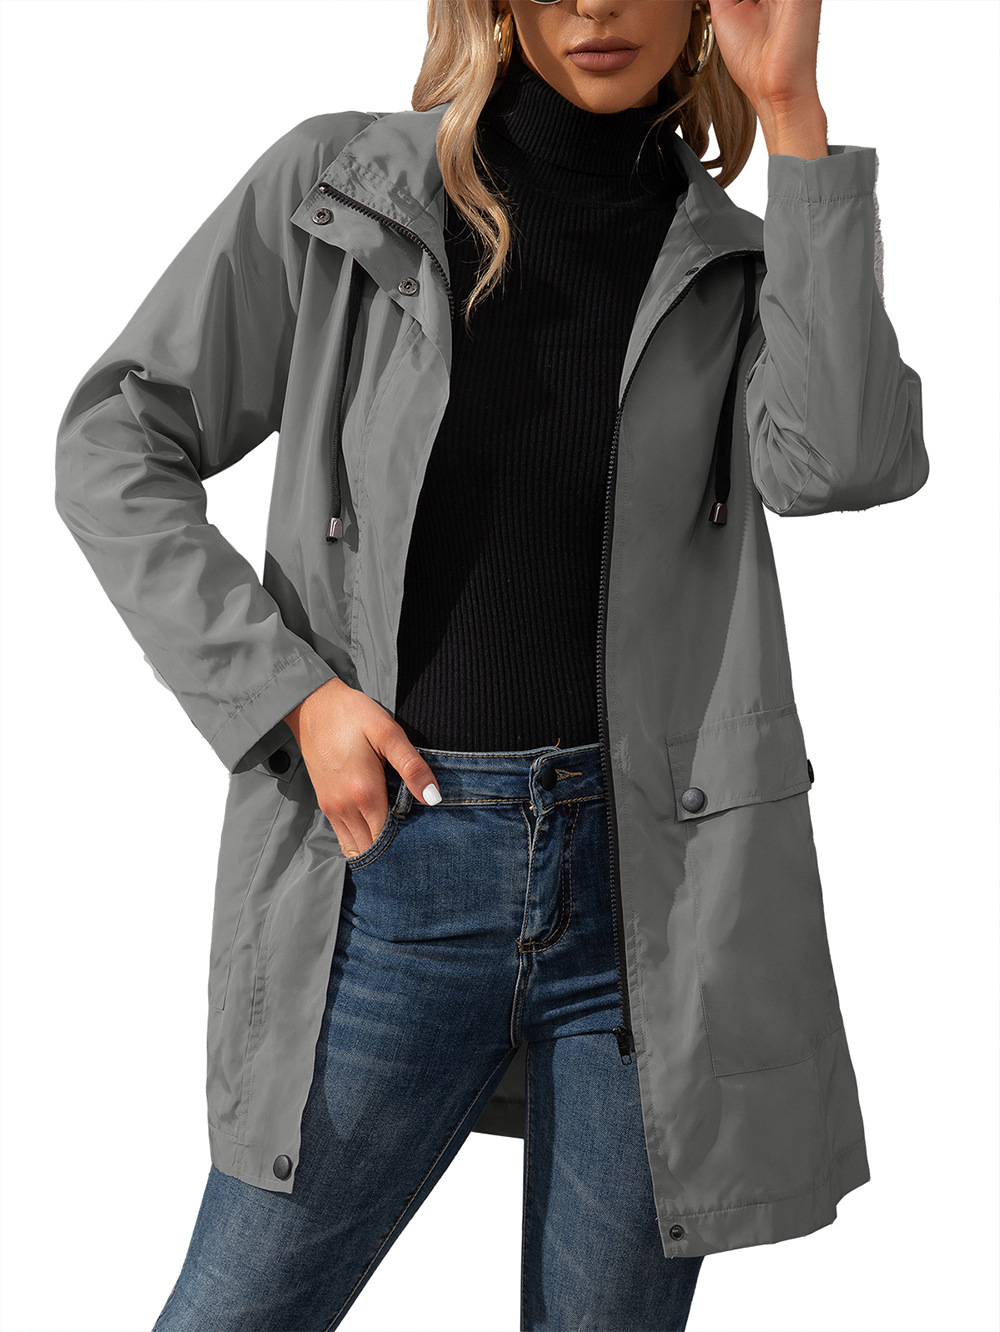 Casual Mid-length Zipper Waterproof Hooded Trench Coat shopper-ever.myshopify.com